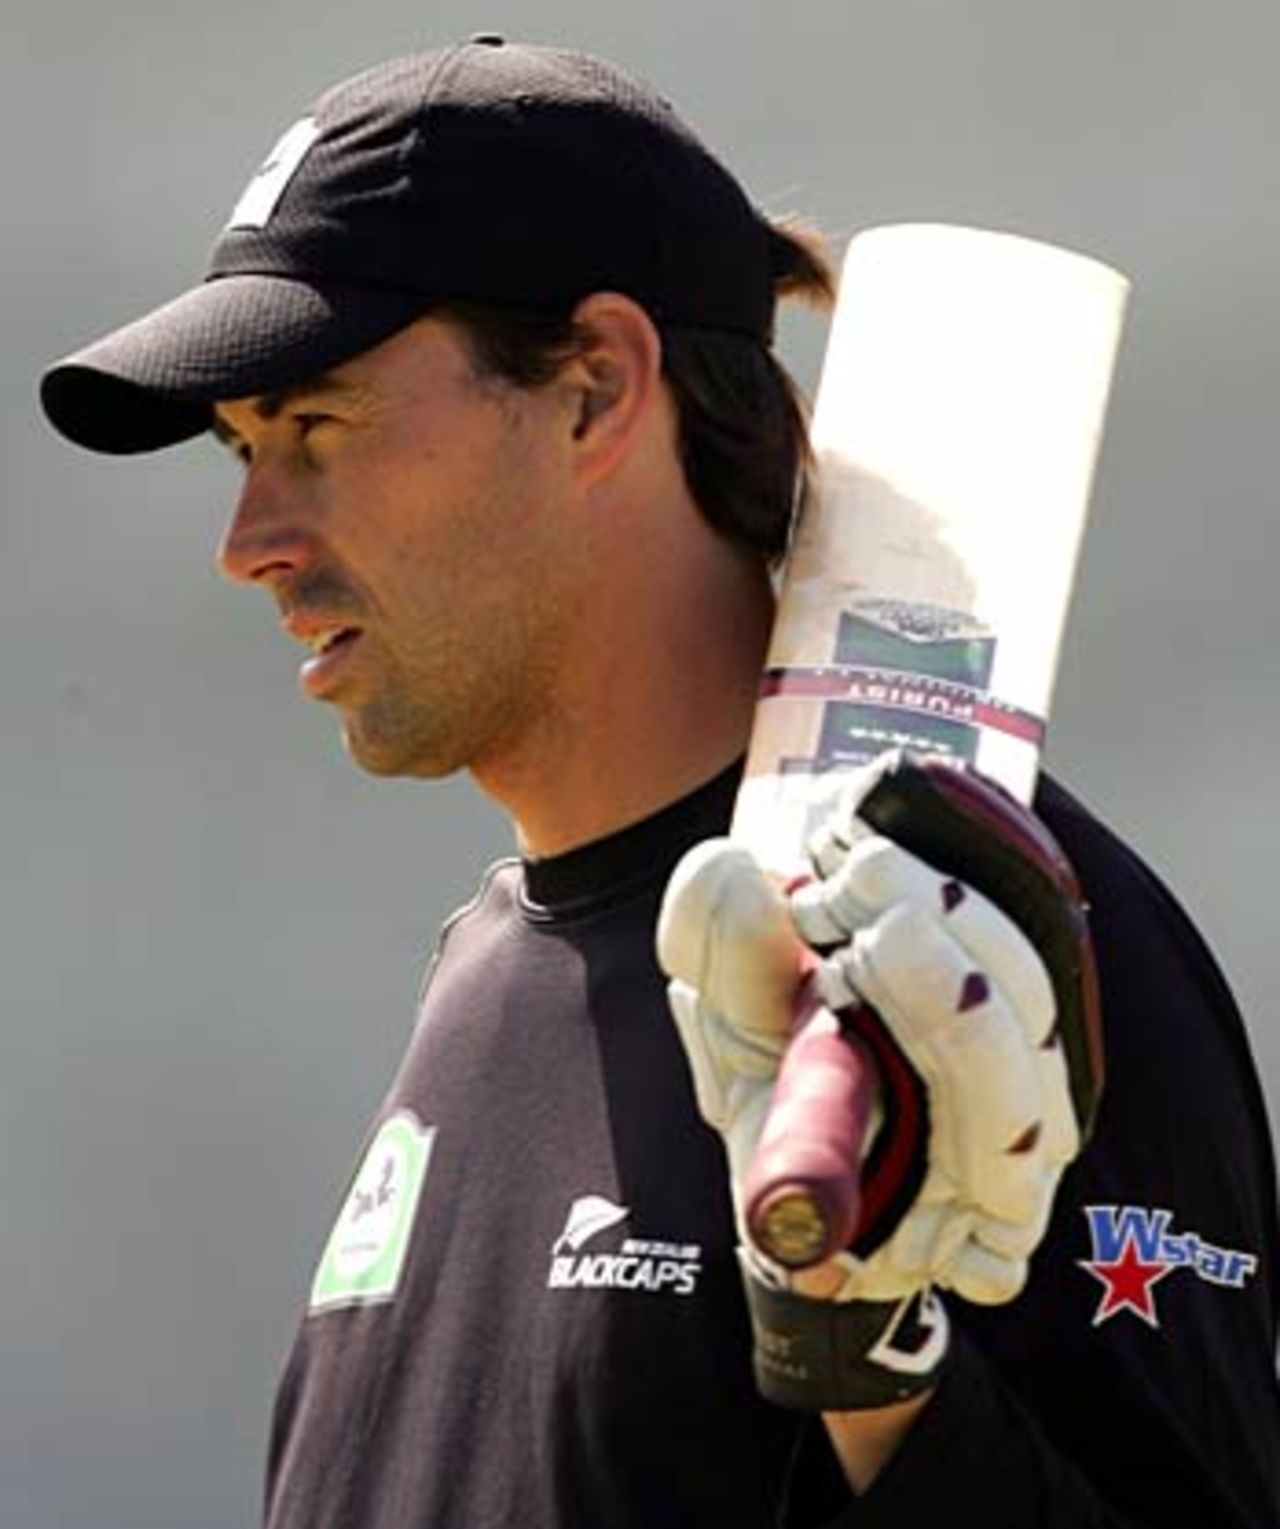 Stephen Fleming in the nets, Christchurch, February 21, 2005